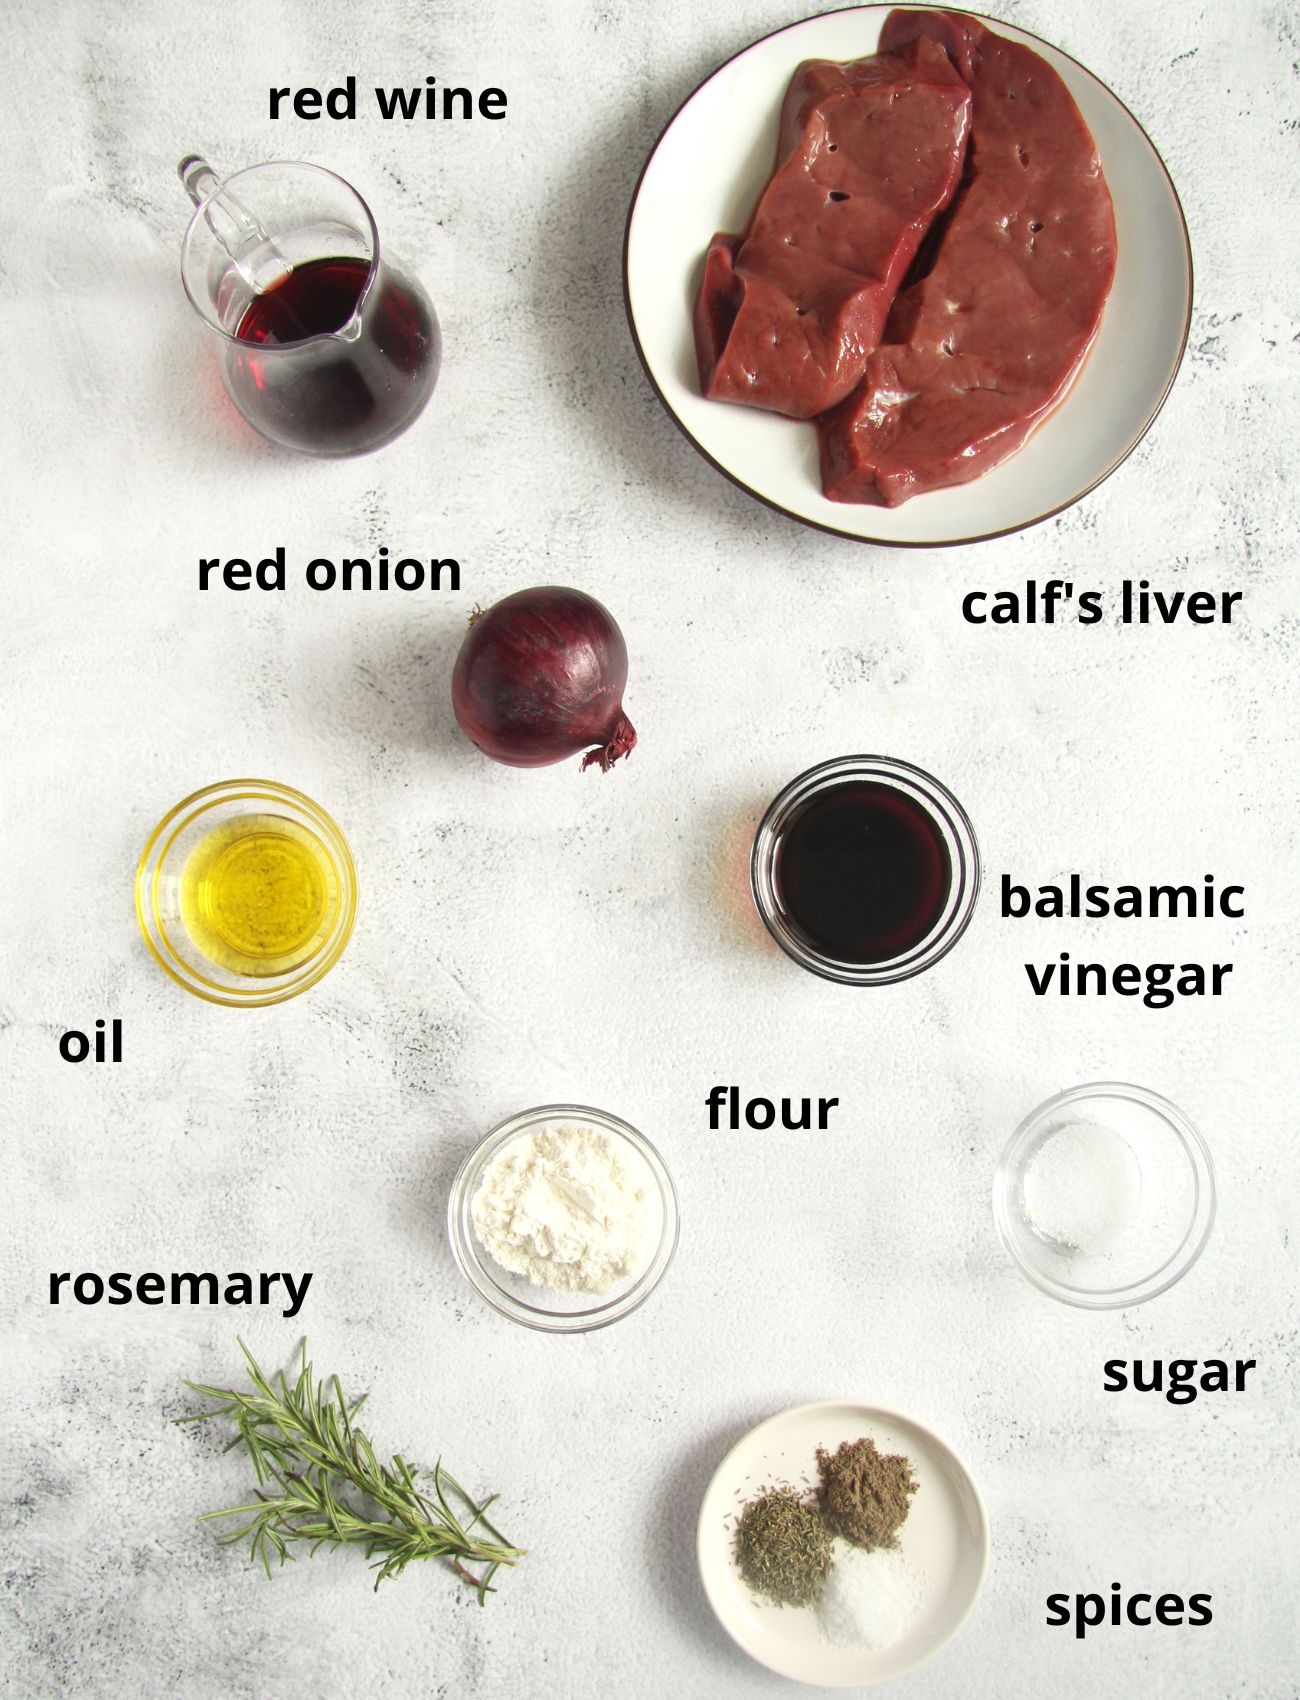 listed ingredients for cooking liver with onions and balsamic vinegar.